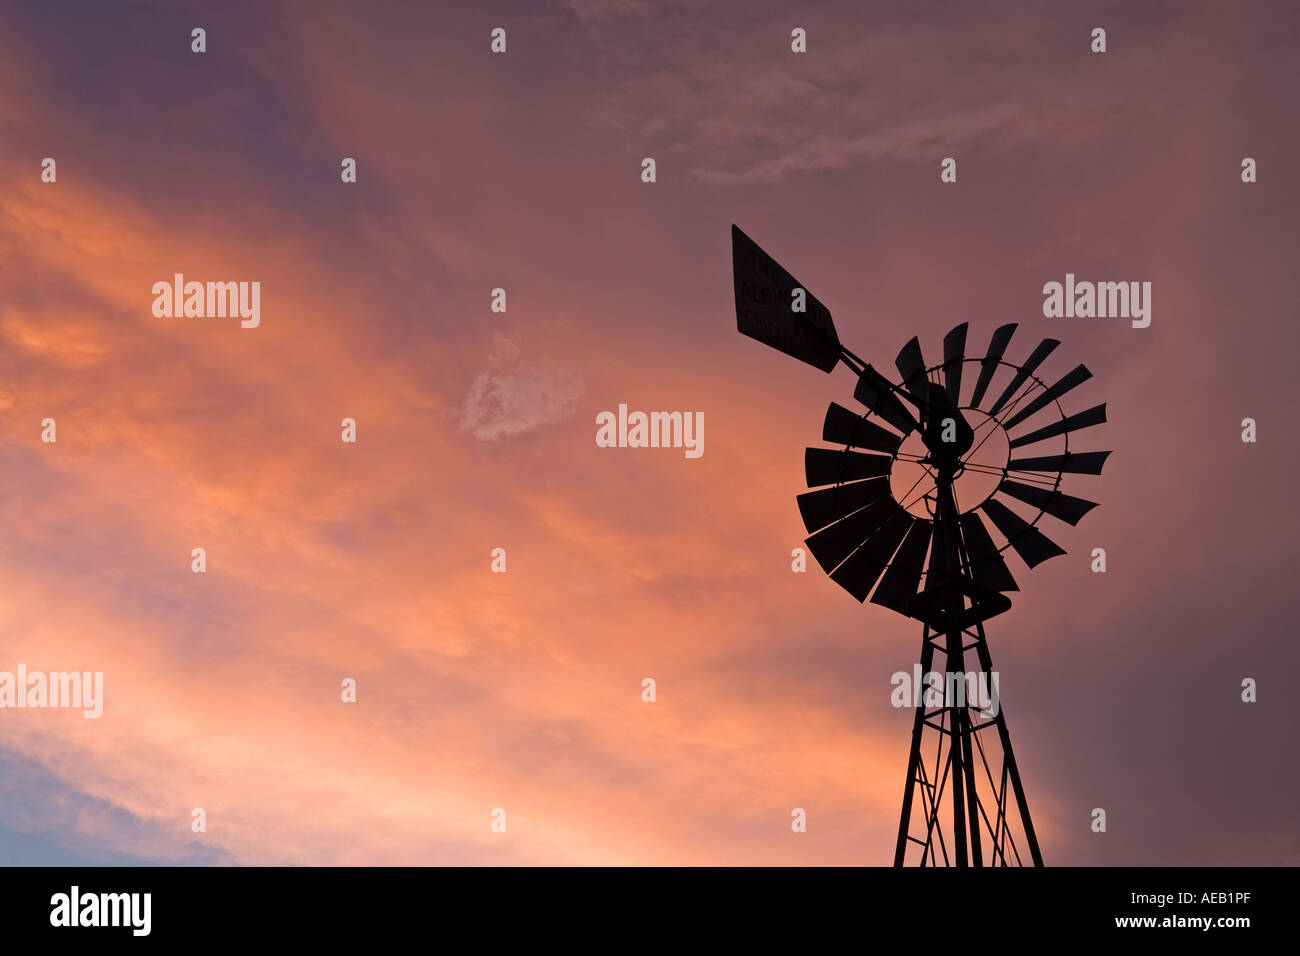 Windmill silhouetted at sunset on the Great Plains, Texas, USA Stock Photo